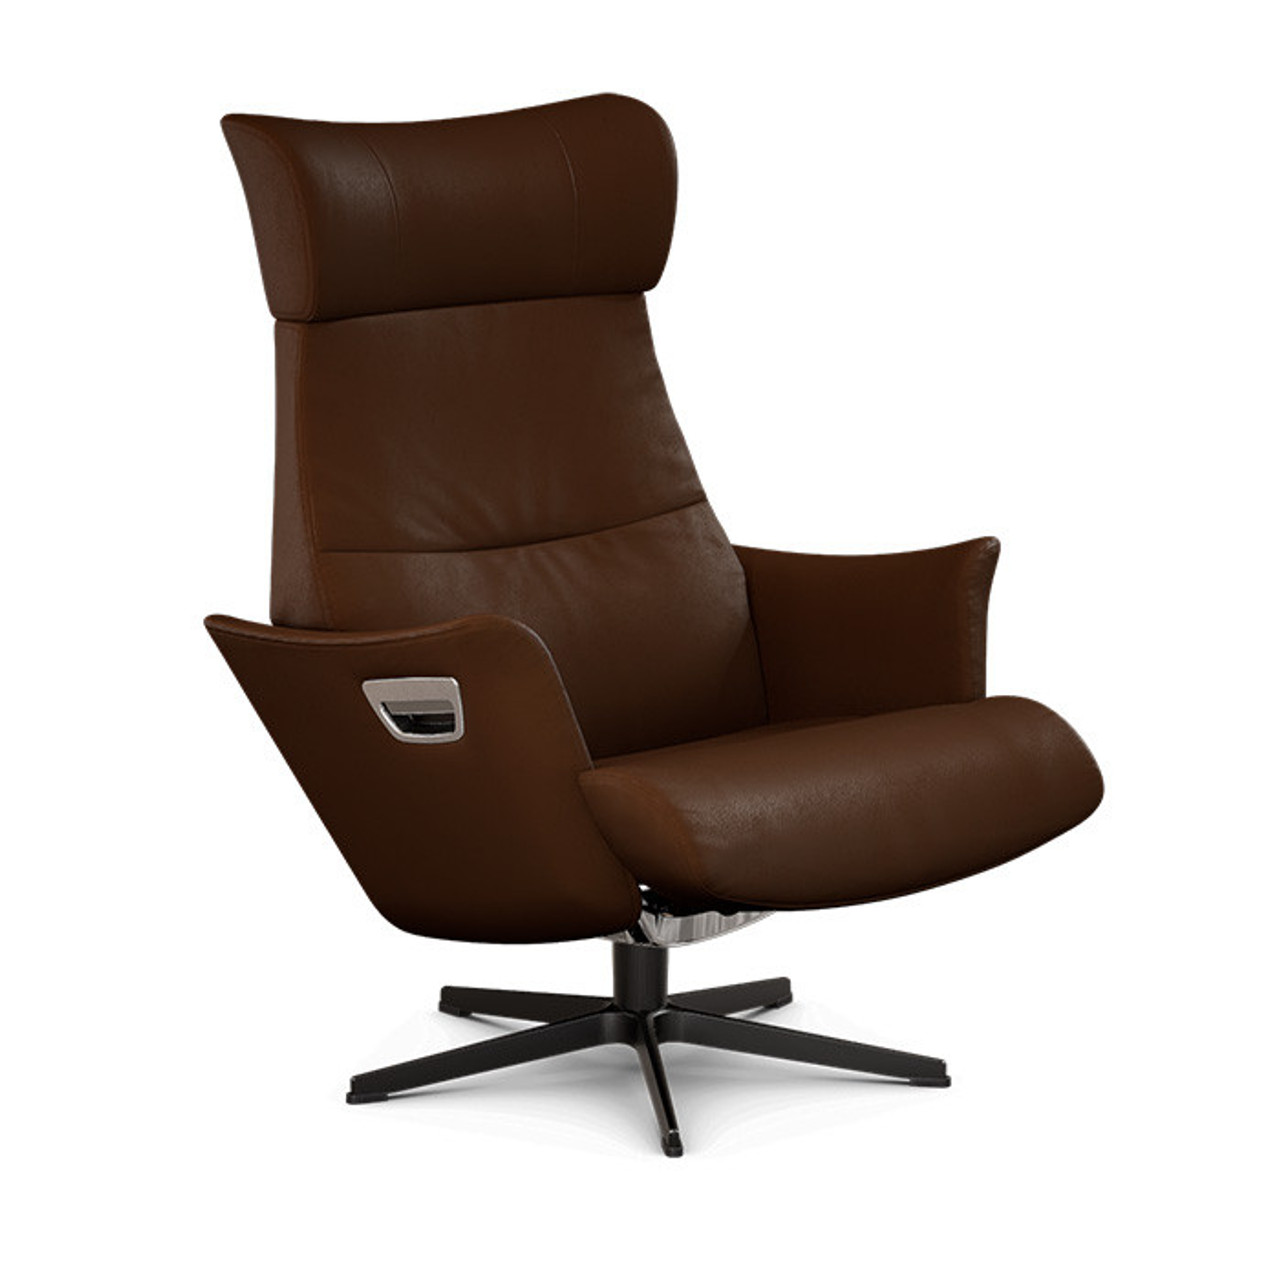 Beyoung Chair High Back (Display Model - Sold As Seen)